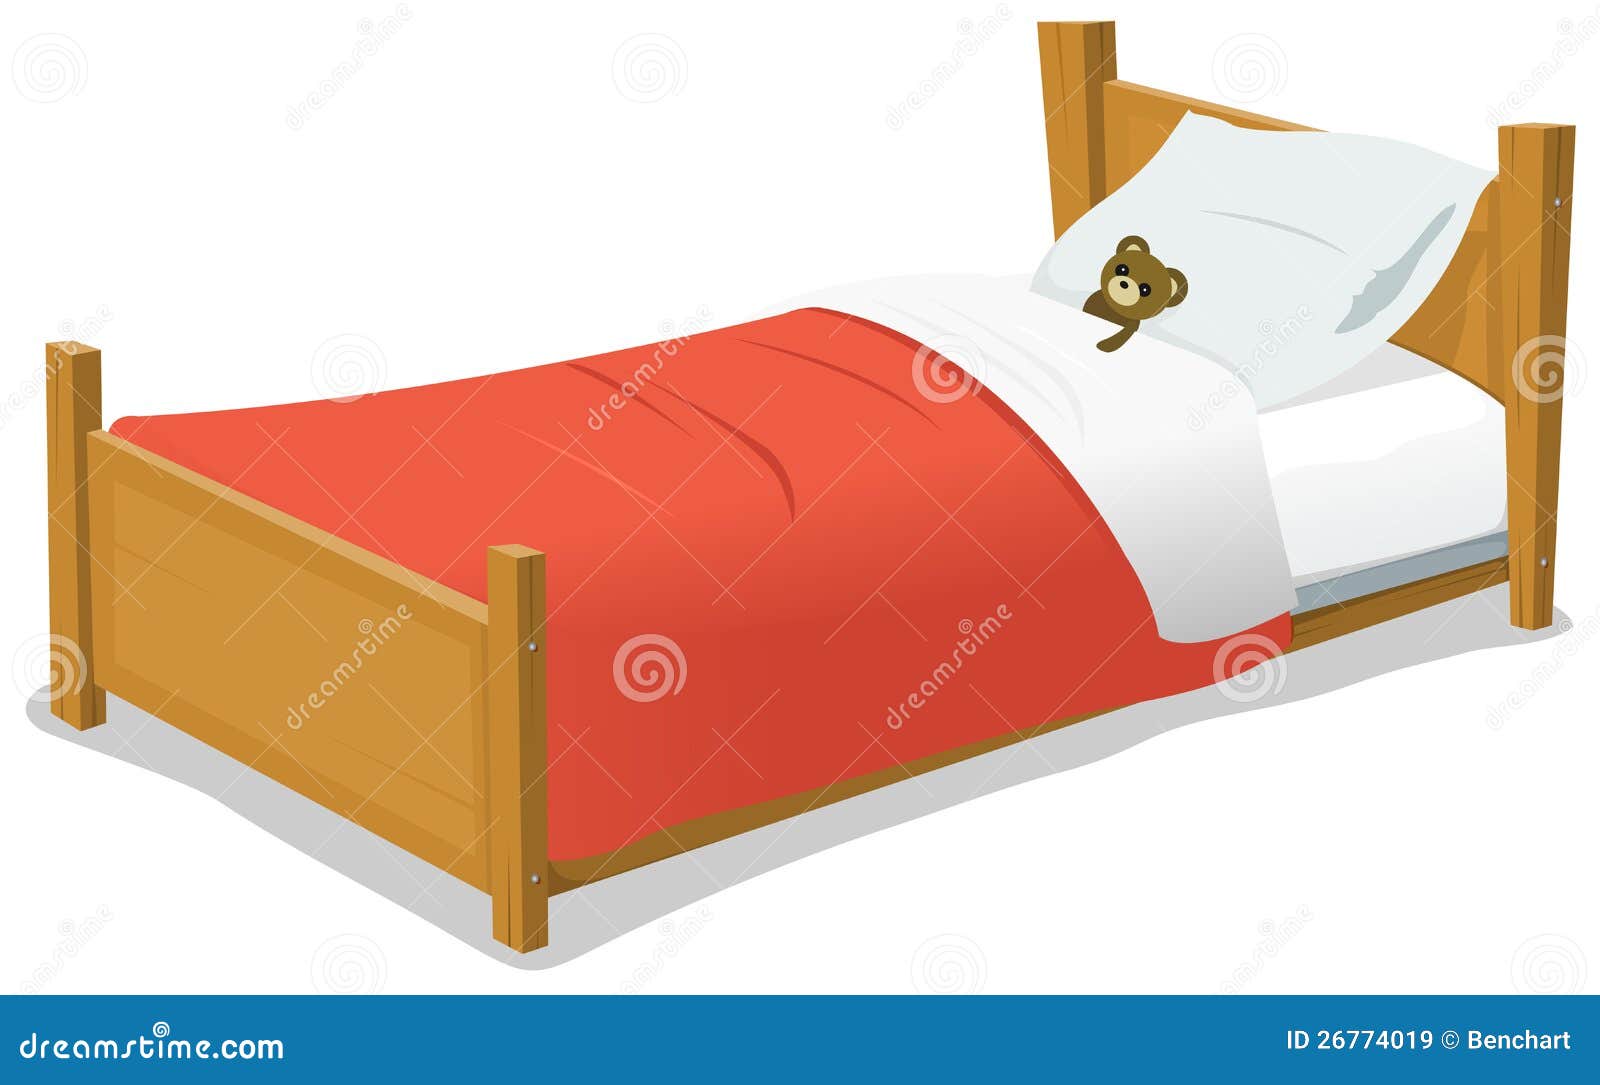 Cartoon Bed With Teddy Bear Royalty Free Stock Images - Image ...